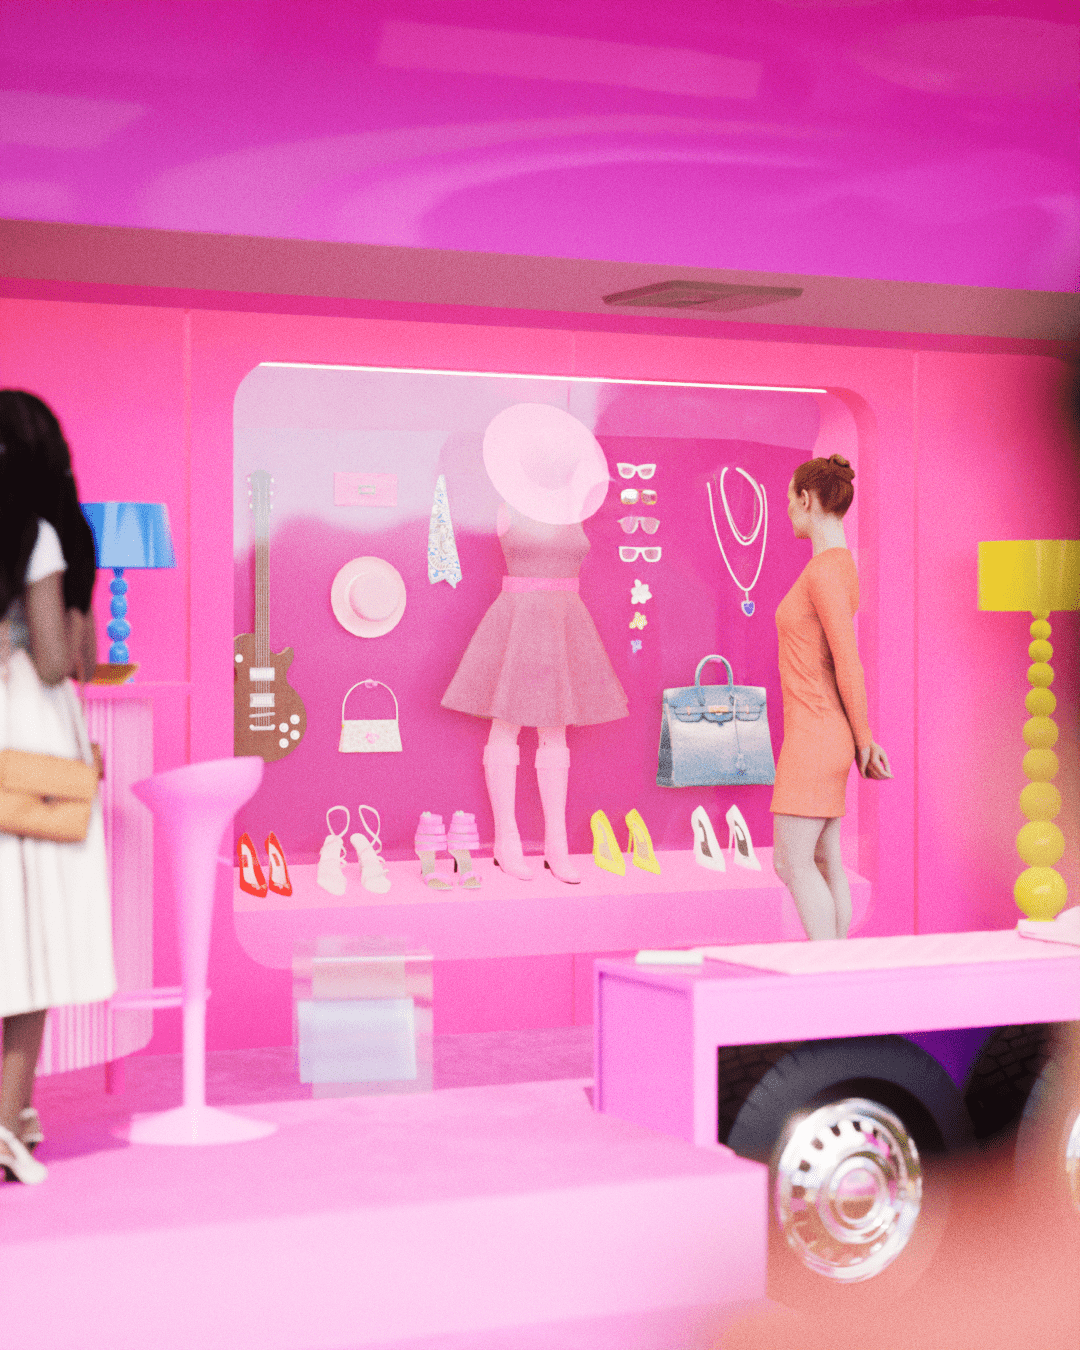 Barbie mobile pop-up display case showing a variety of Barbie attire and accessories.